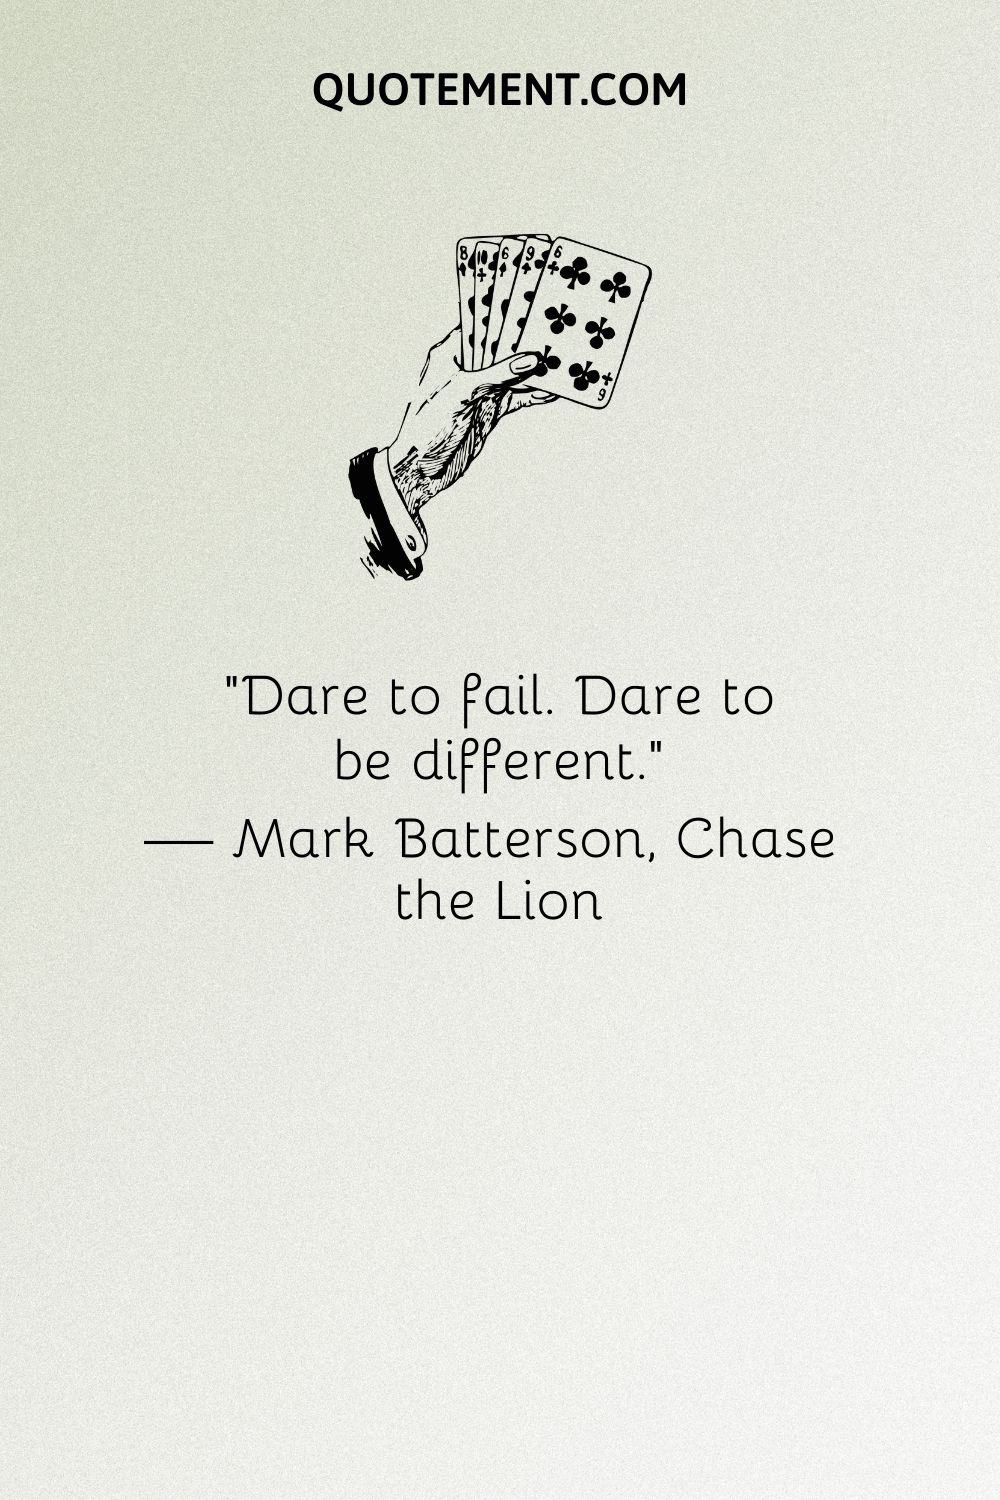 Dare to fail. Dare to be different